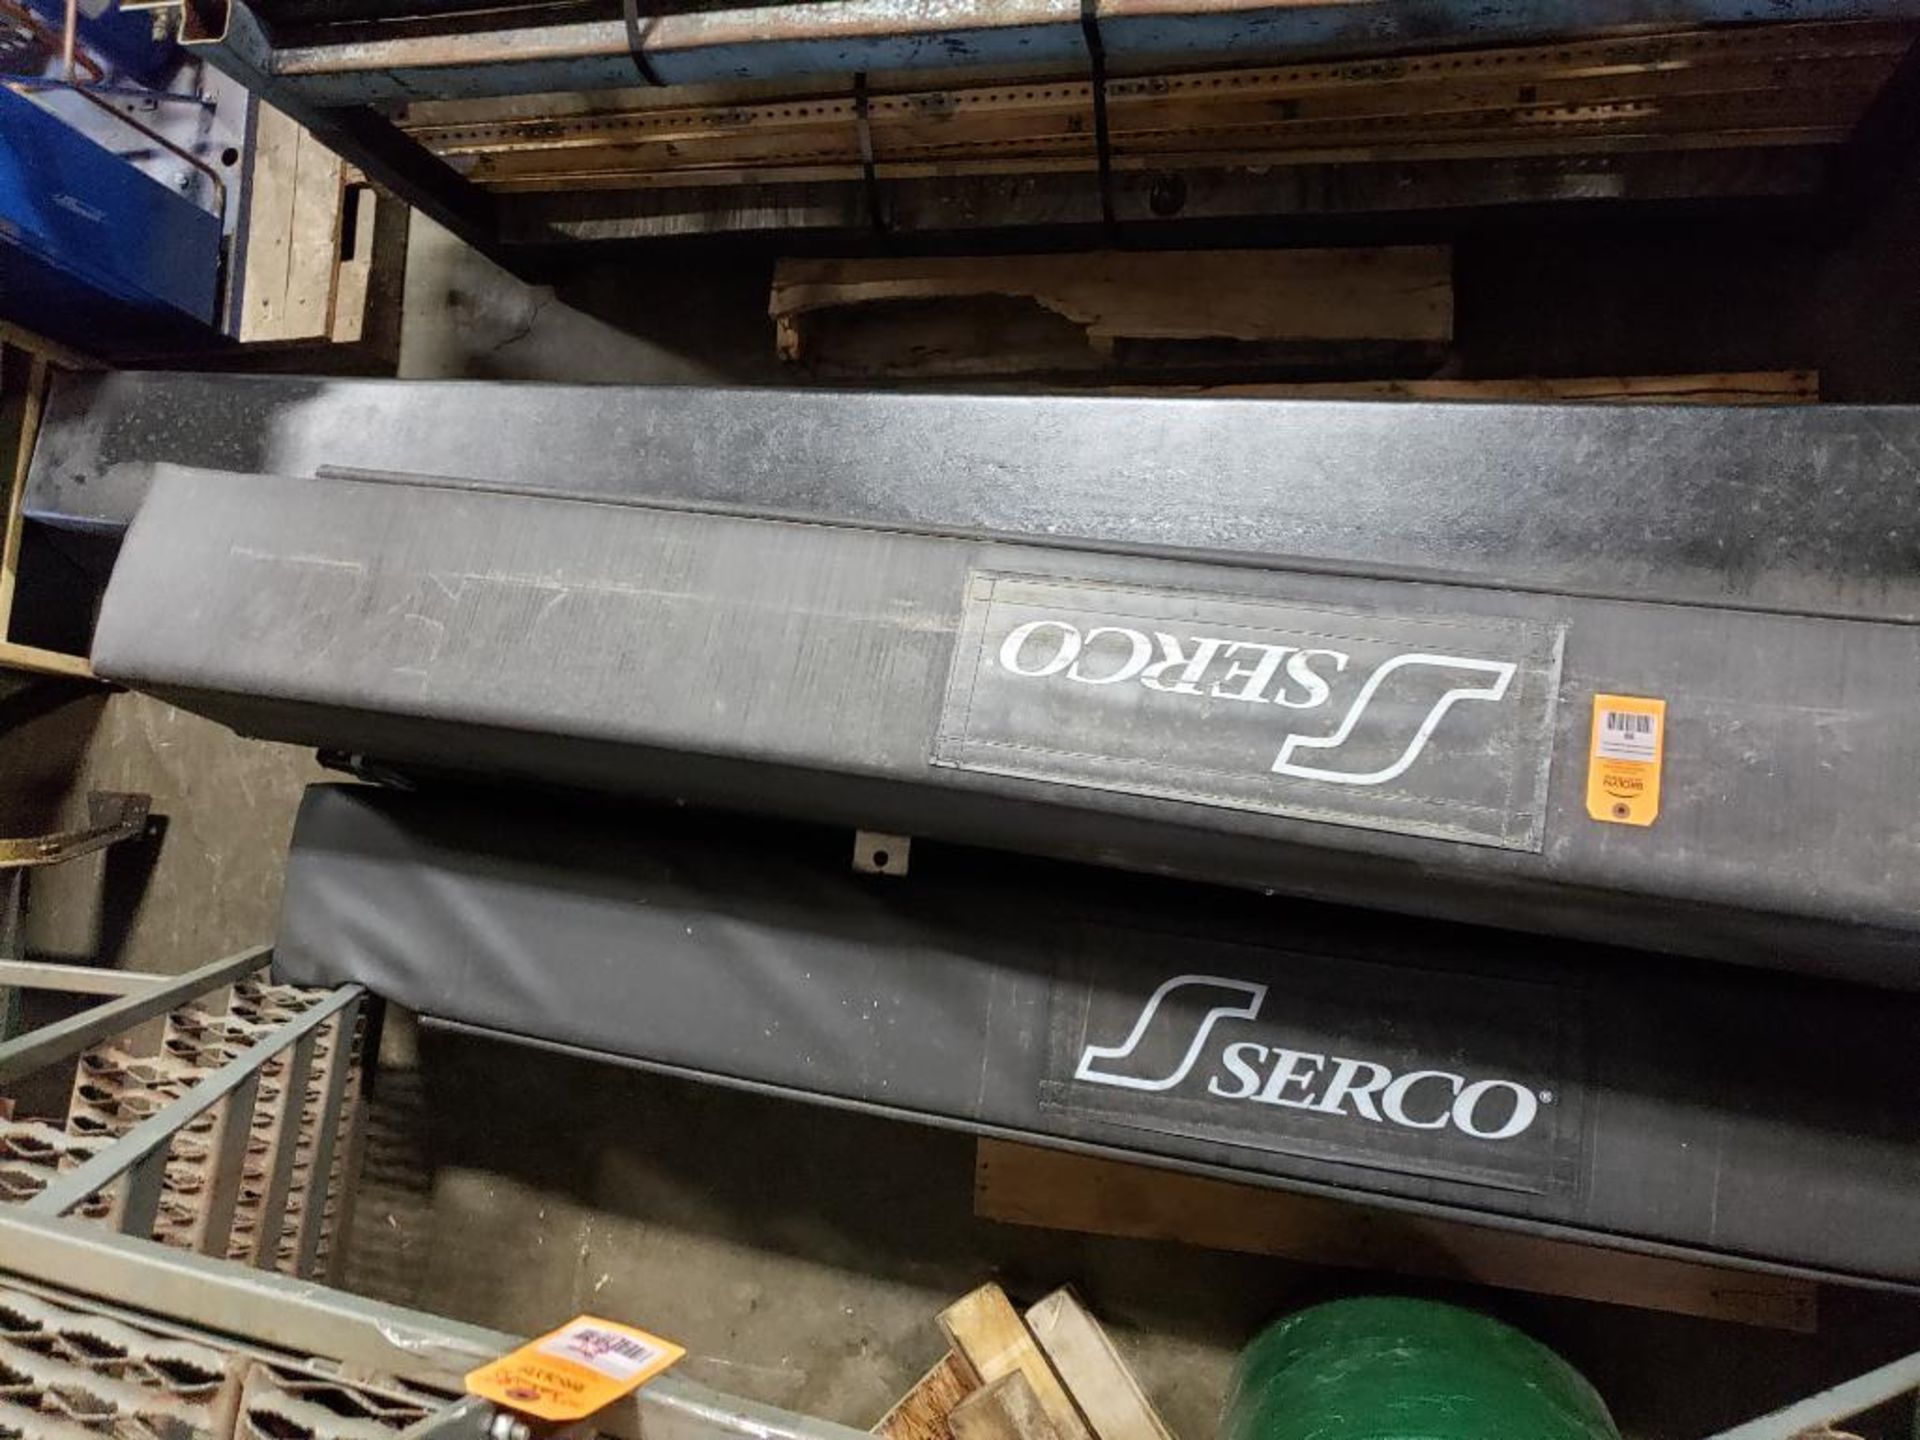 Qty 4 - Serco dock bumpers. - Image 5 of 6